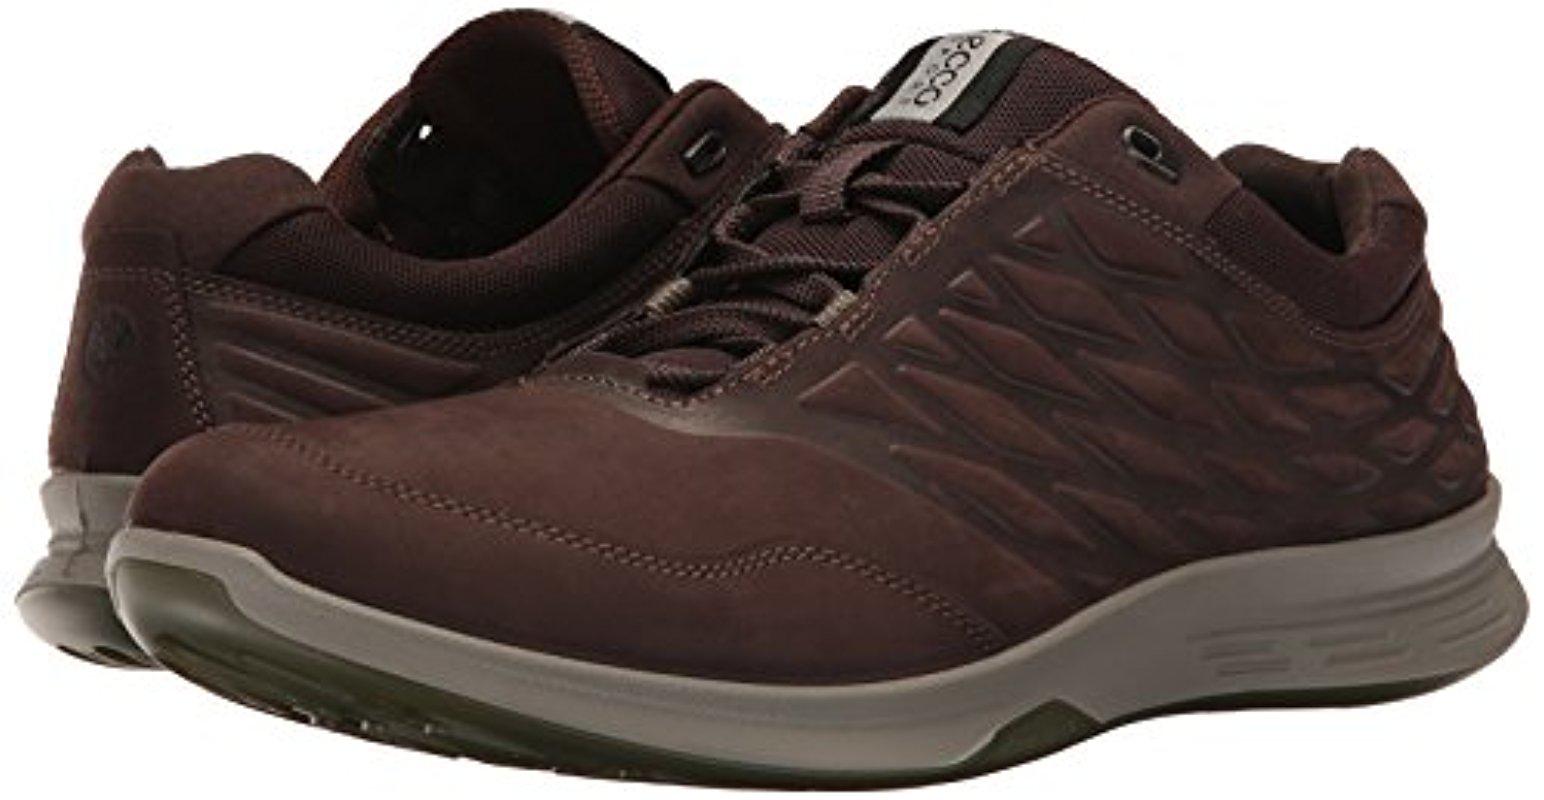 ecco exceed low walking shoes